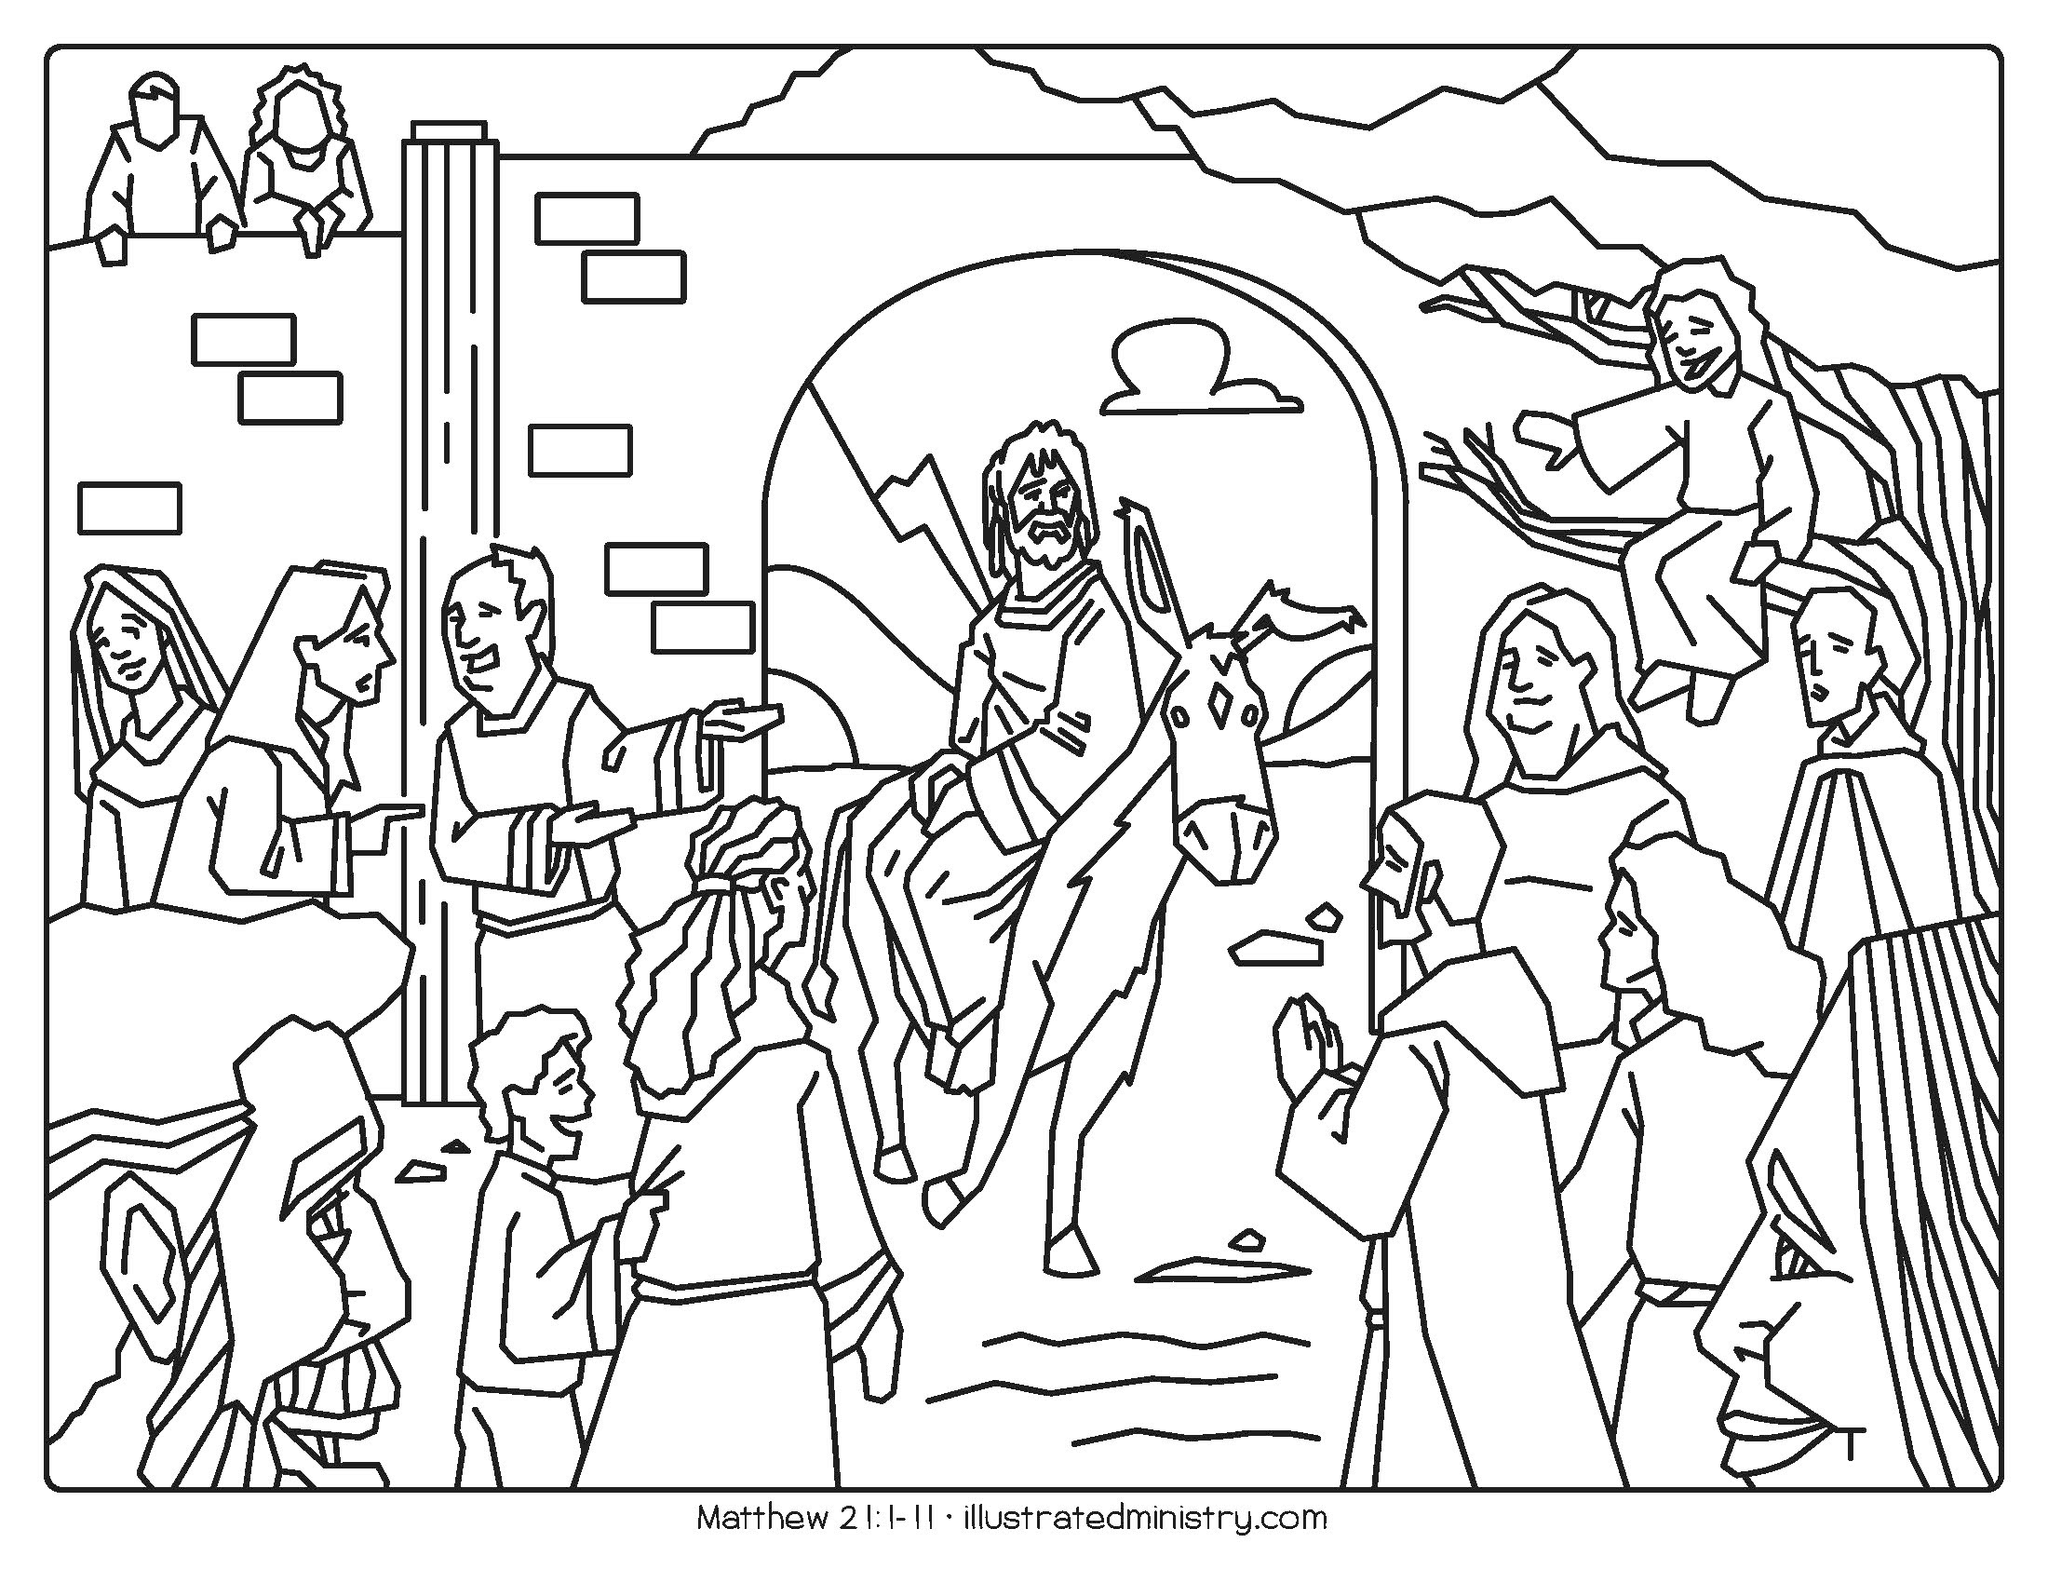 Download Bible Story Coloring Pages: Spring 2020 - Illustrated Ministry